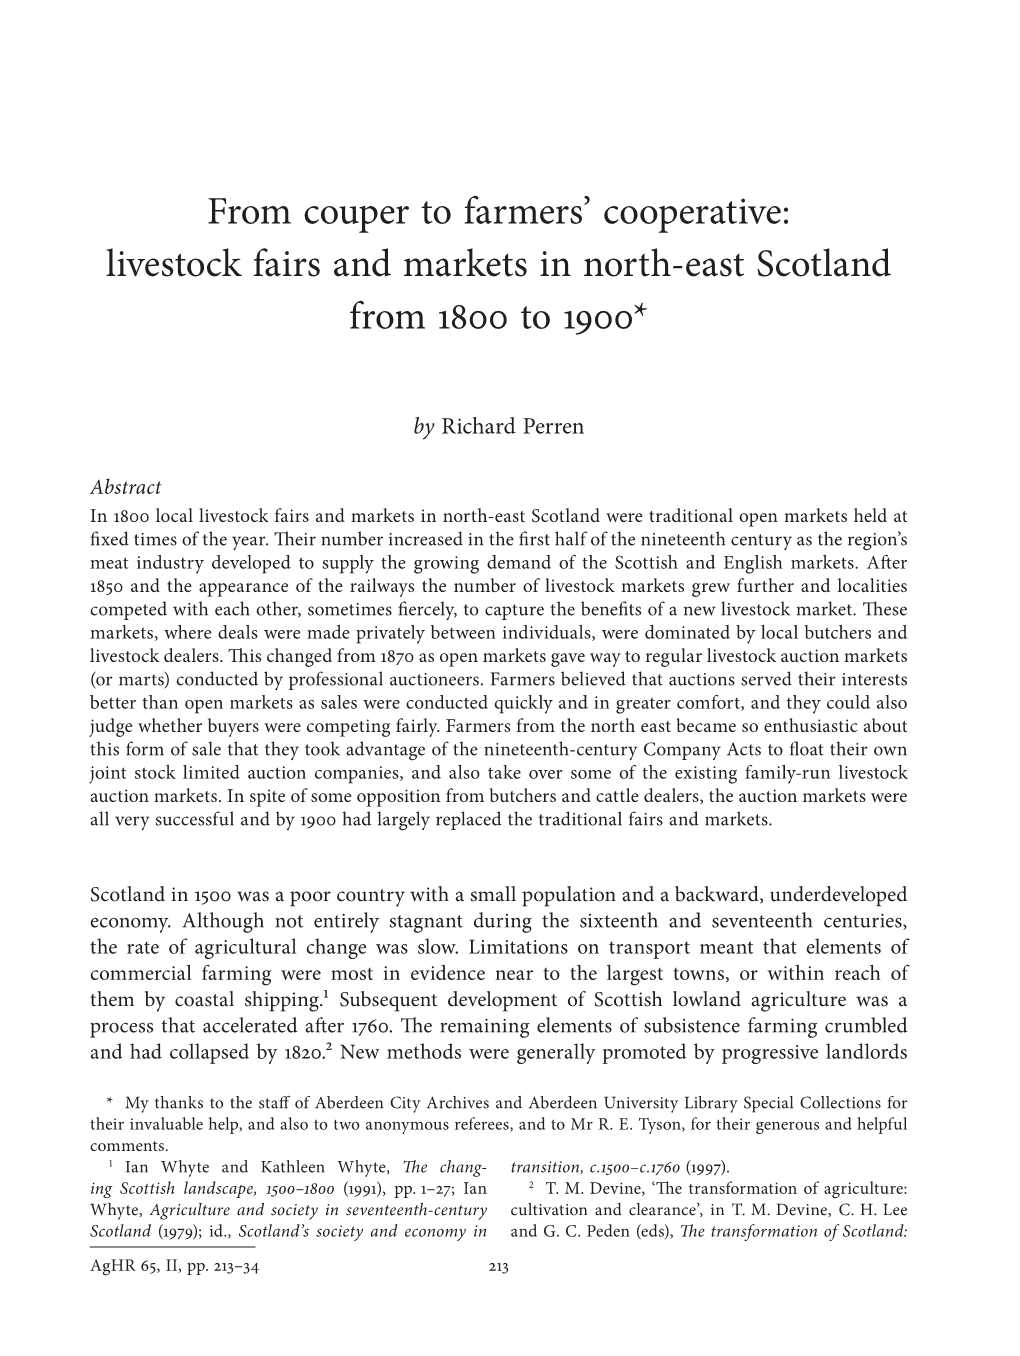 From Couper to Farmers' Cooperative